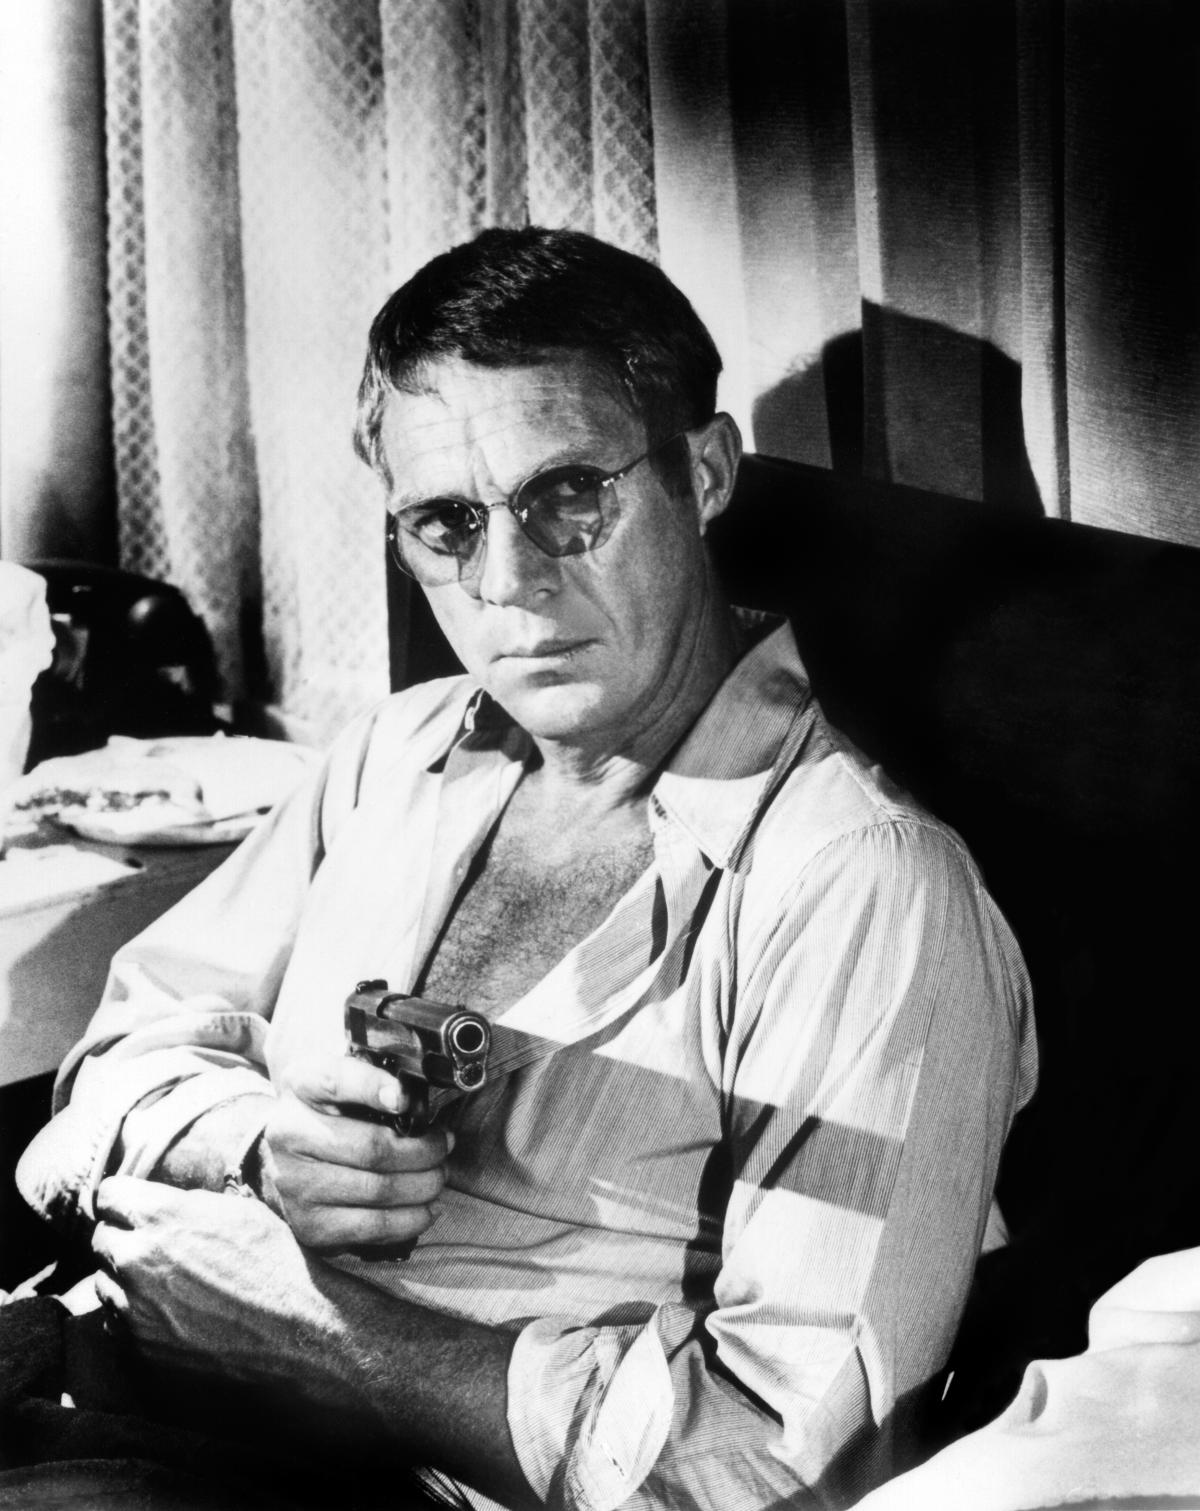 McQueen, wearing tinted sunglasses and a shirt half-unbuttoned, casually points a gun